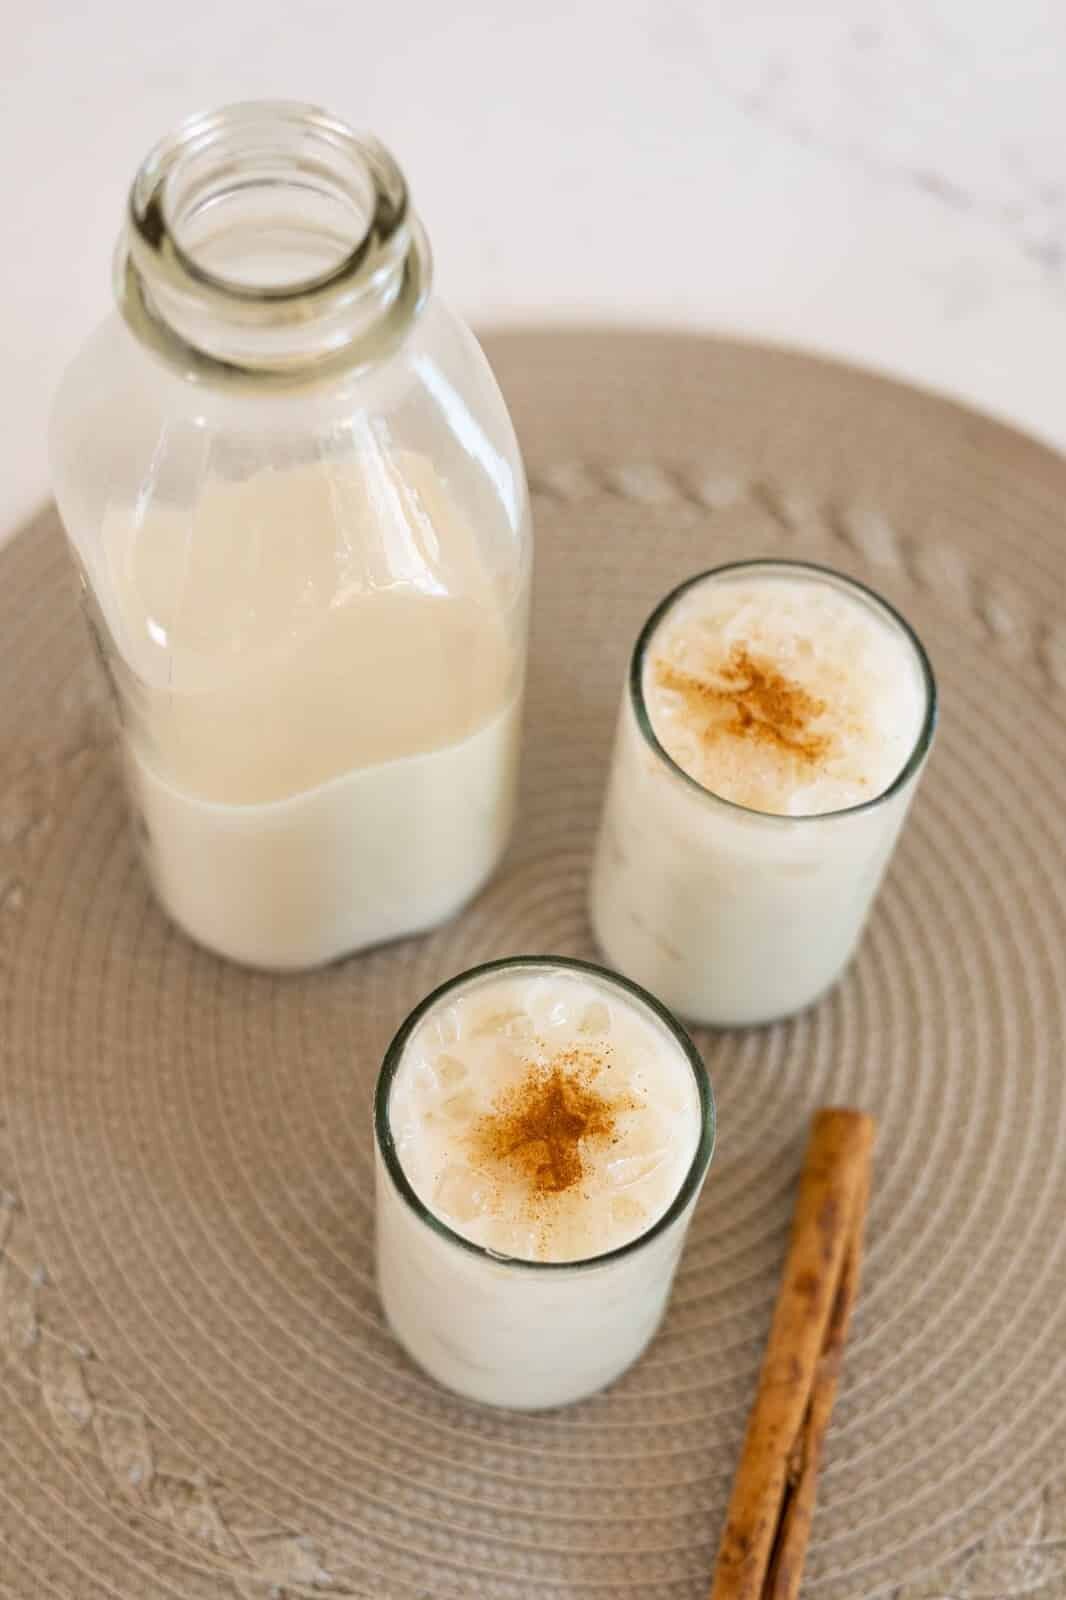 Two glasses of creamy tiger nut milk, garnished with ice cubes and sprinkles of cinnamon, rest on a placemat between a large glass jar of tigernut milk and a cinnamon stick.